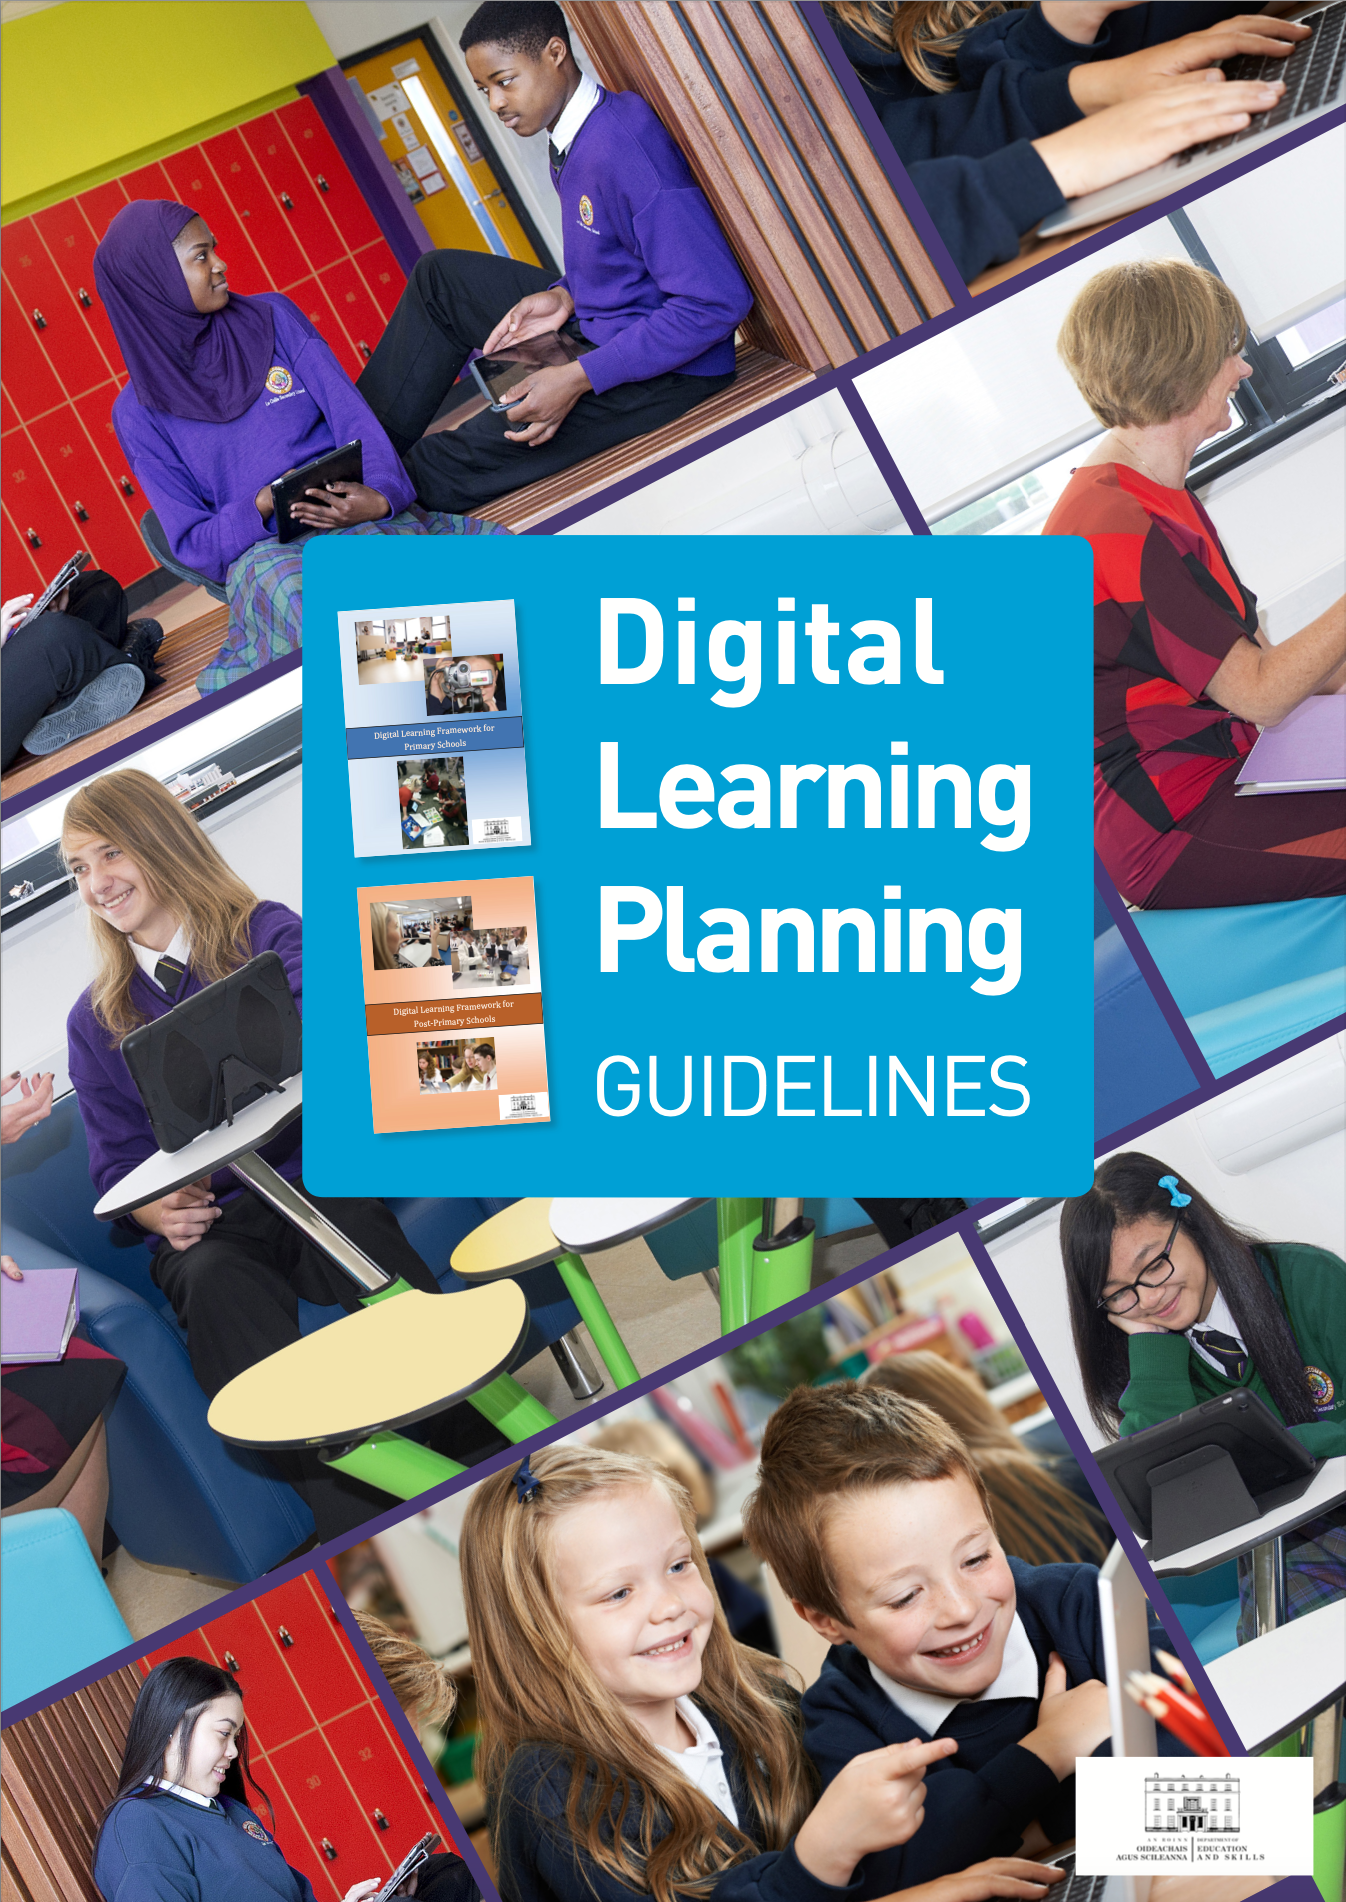 Digital Learning Planning Guidelines